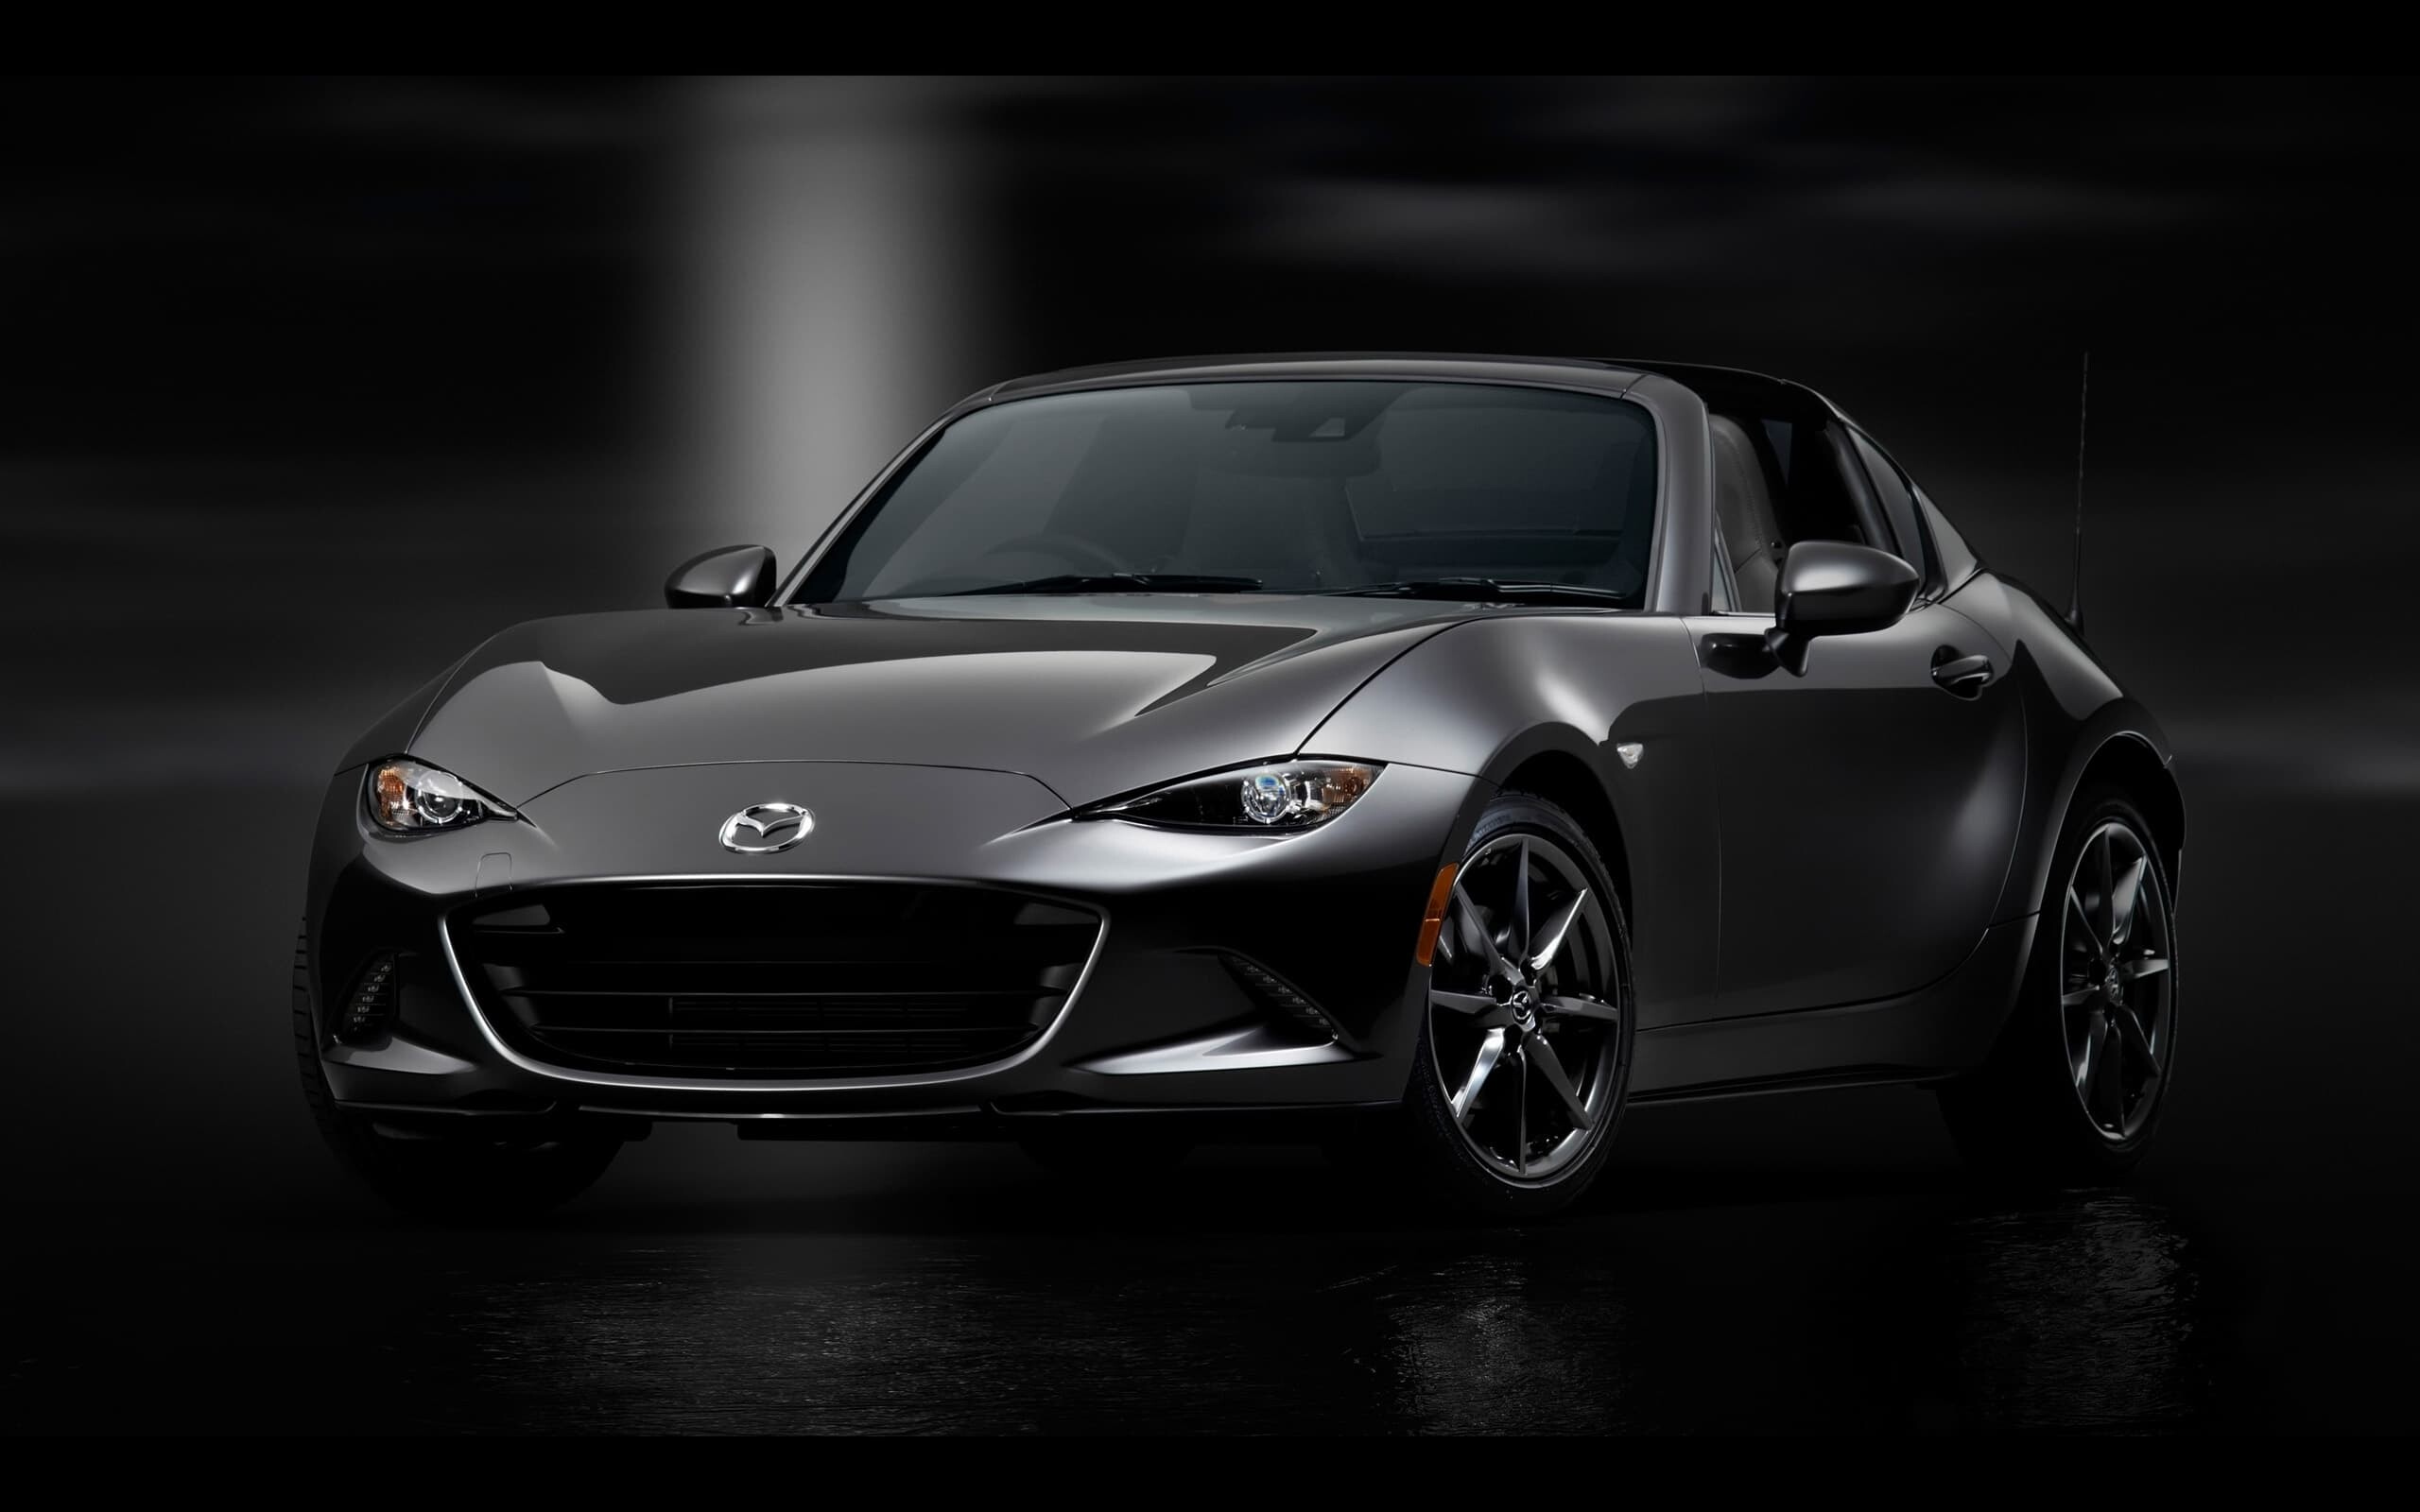 Mazda MX-5 Miata: The second generation was unveiled in 1997, Sports coupe. 2560x1600 HD Wallpaper.